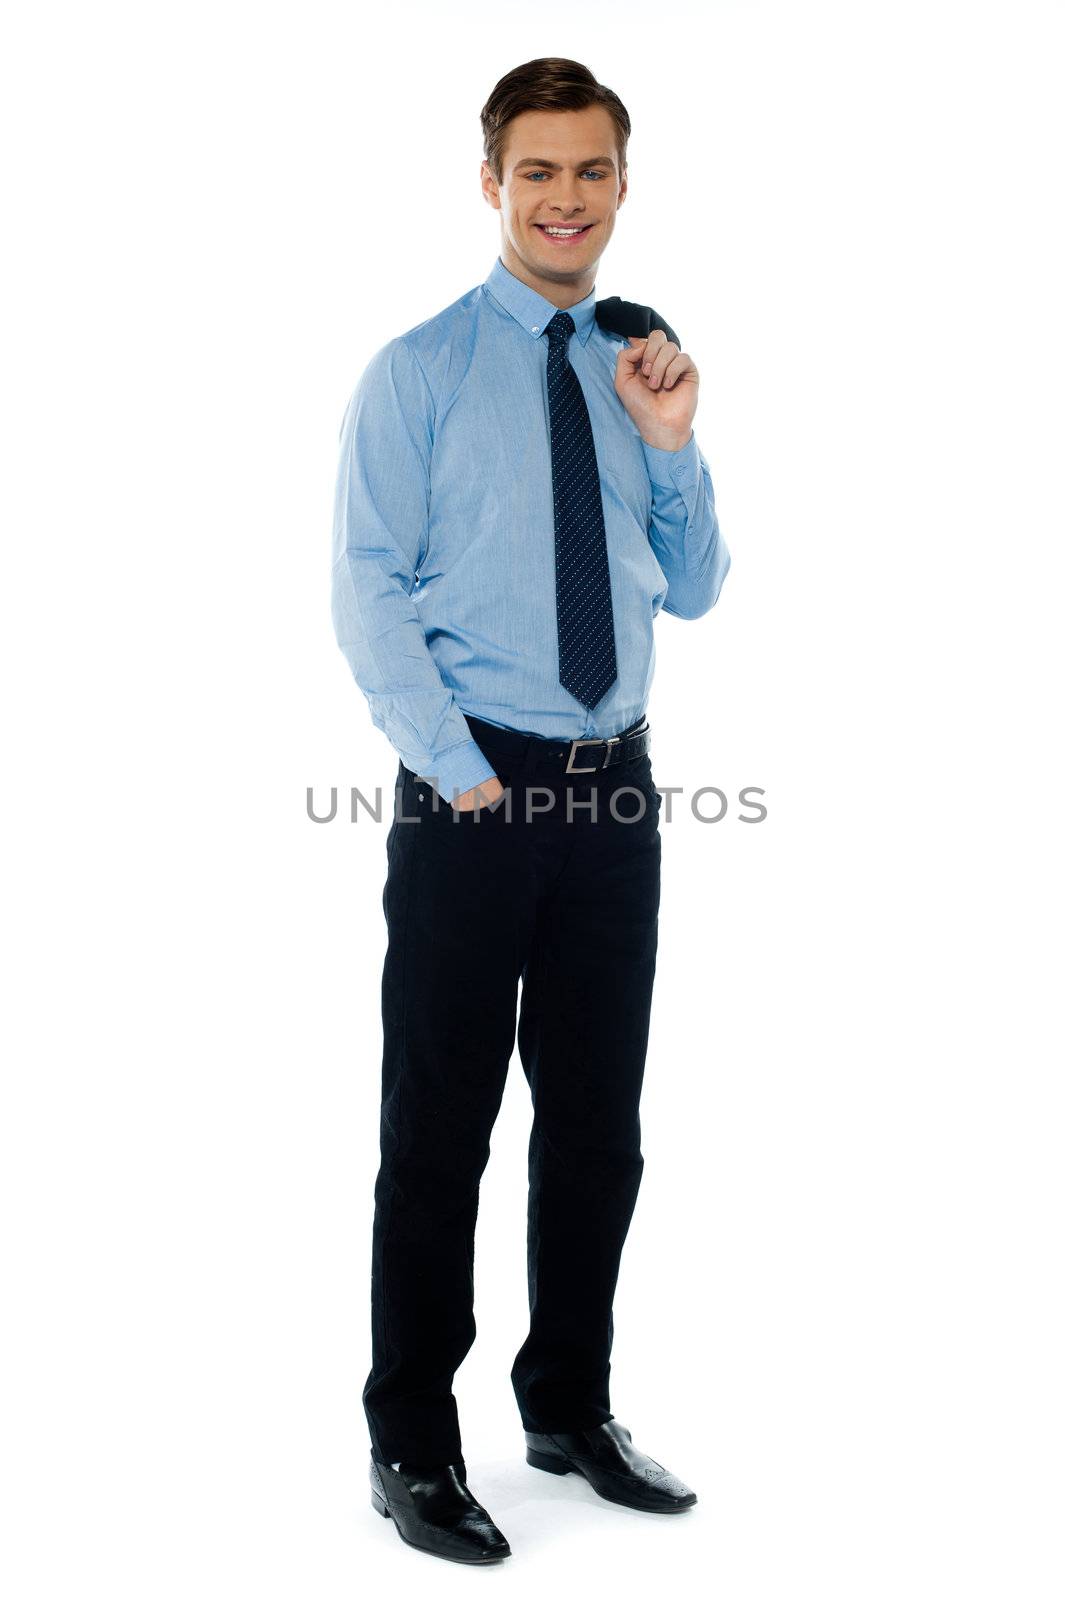 Portait of a professional businessman holding his coat and posing in style